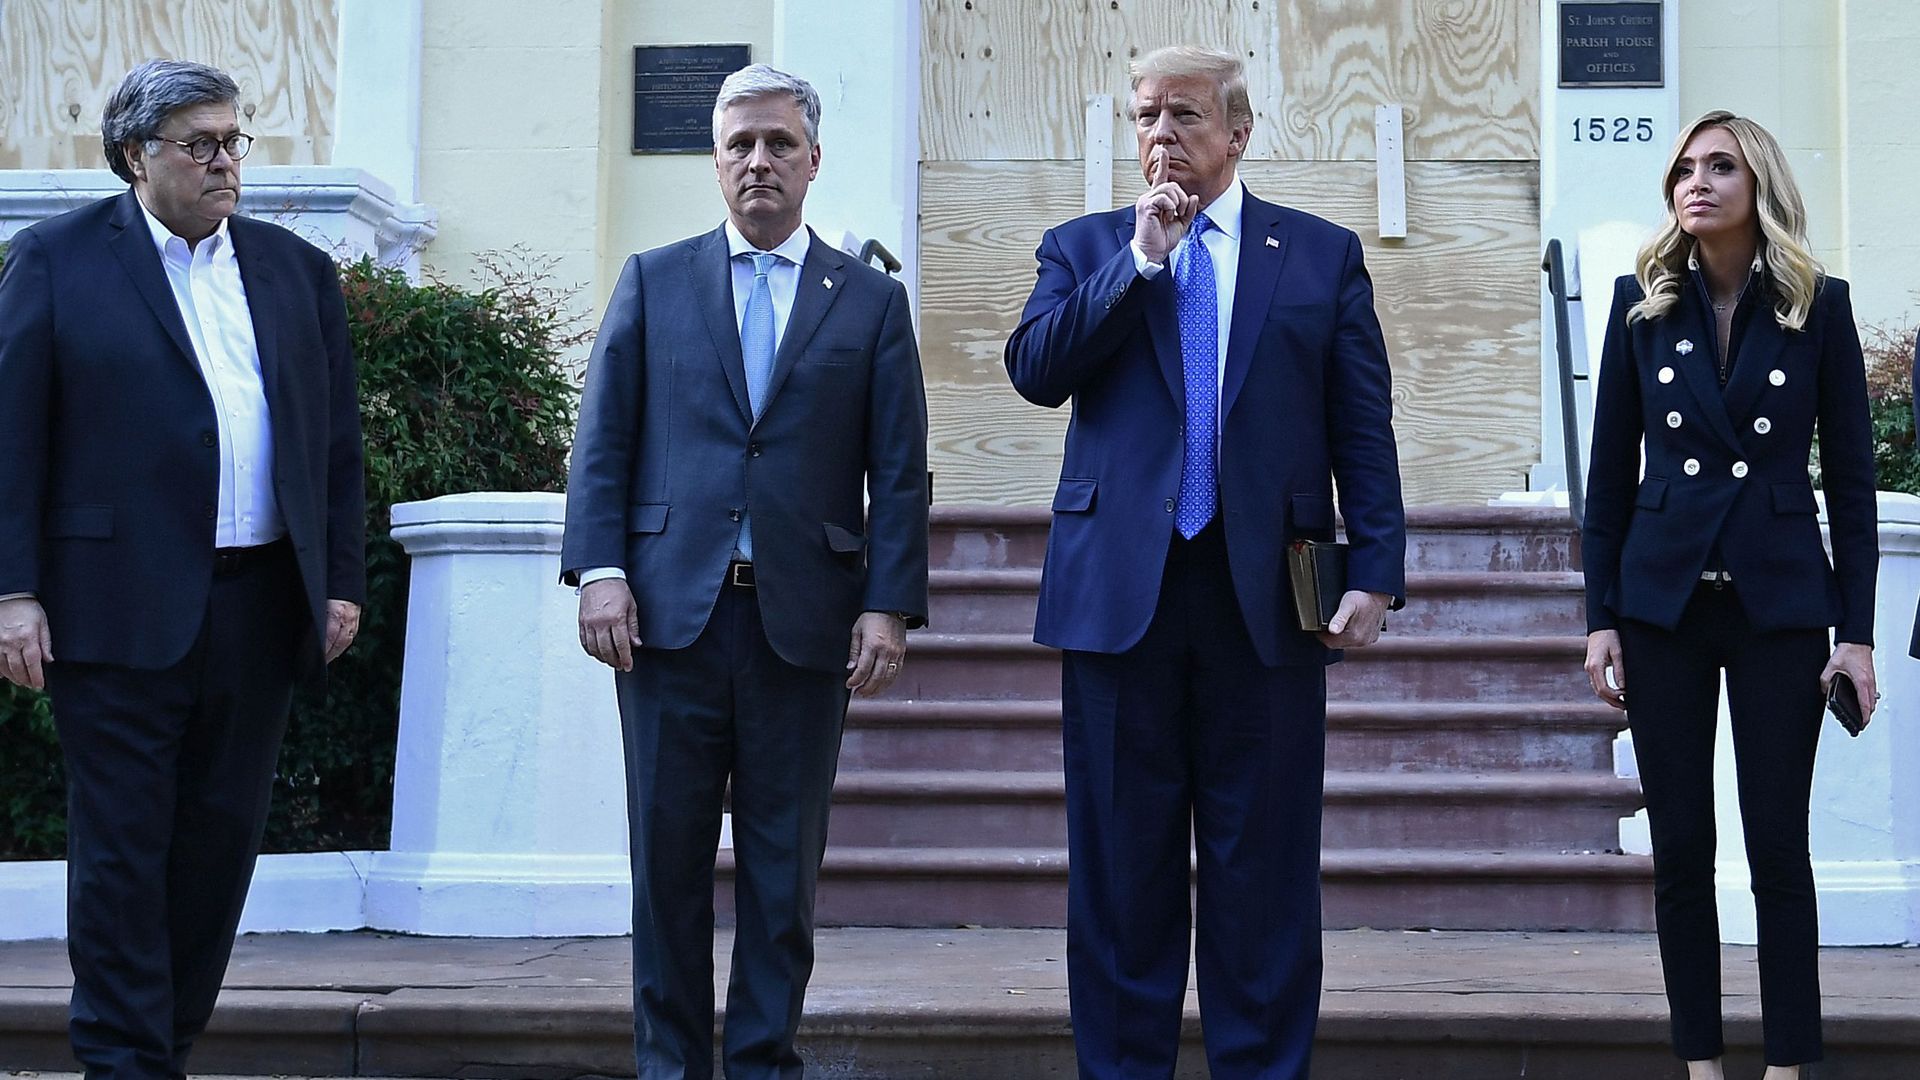 Trump with Barr and Meadows outside St. John's Episcopal church in Washington, D.C. on June 1.